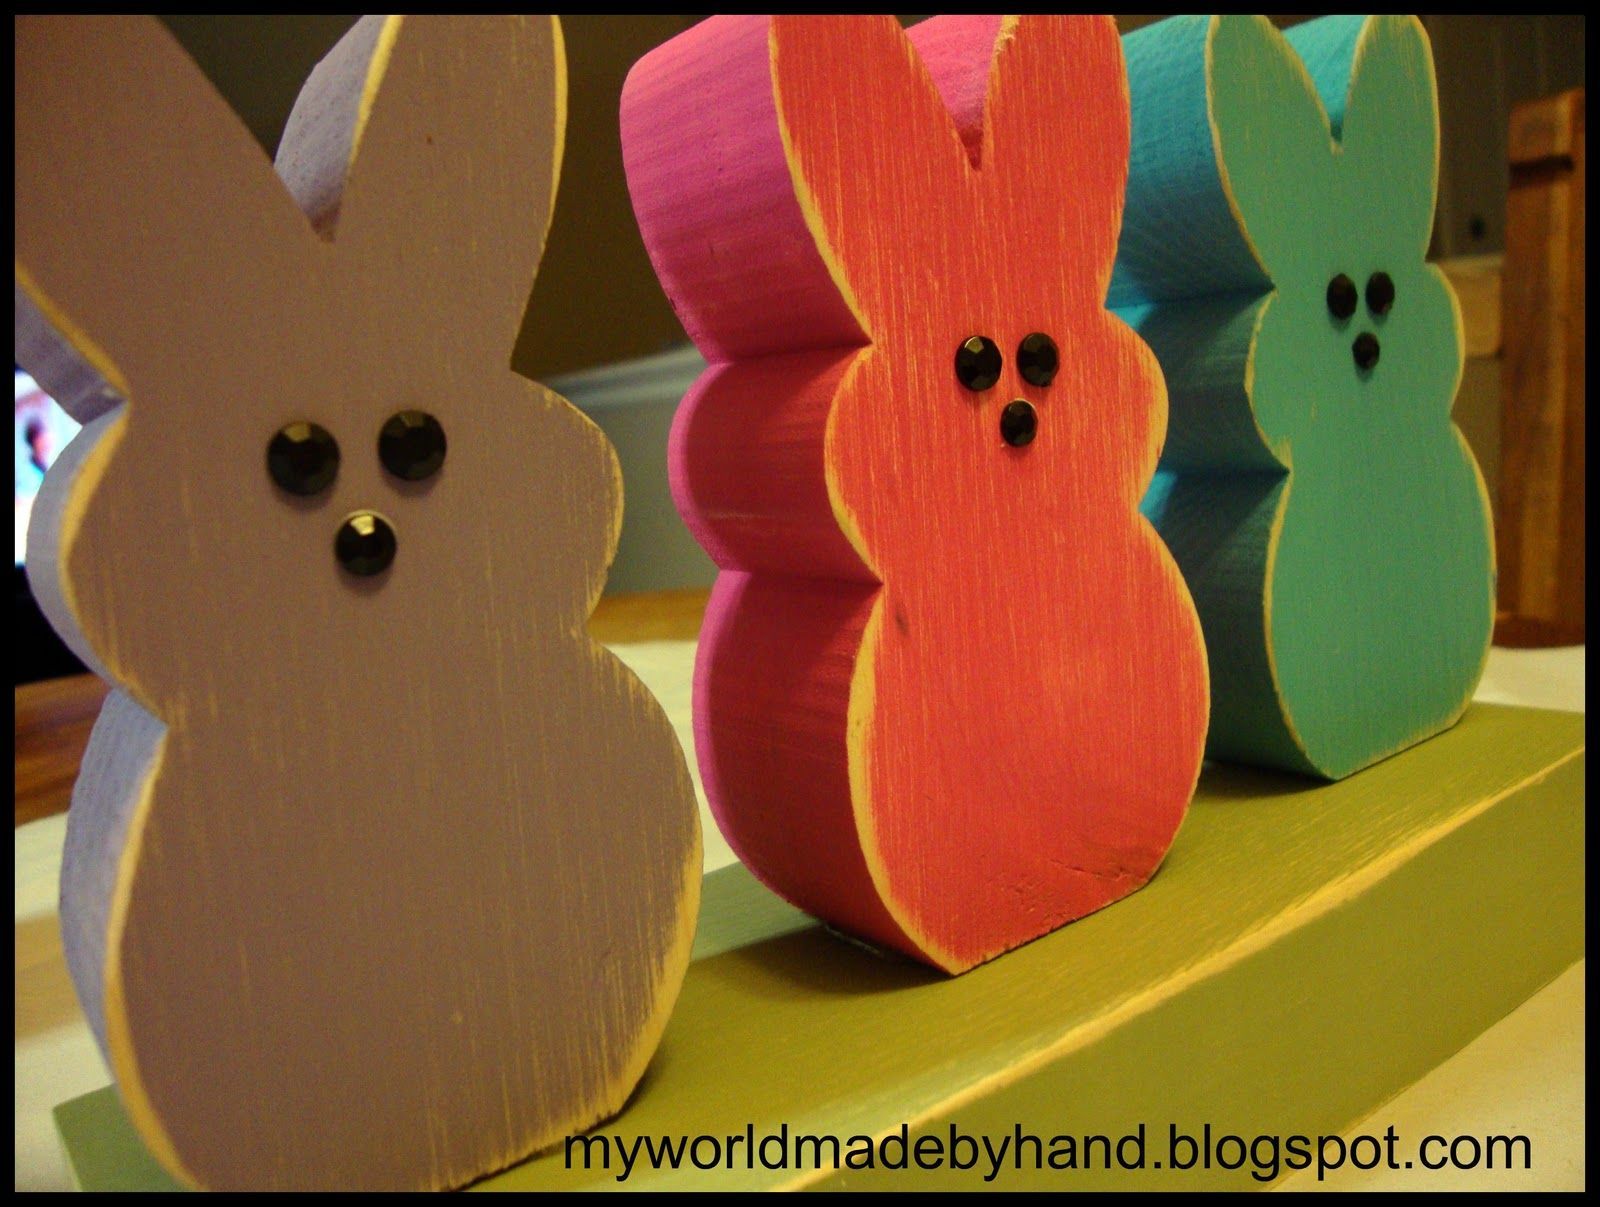 wooden peeps!  I would paint them in pastel colors.  Soooooo  cute. -   23 wooden spring crafts
 ideas